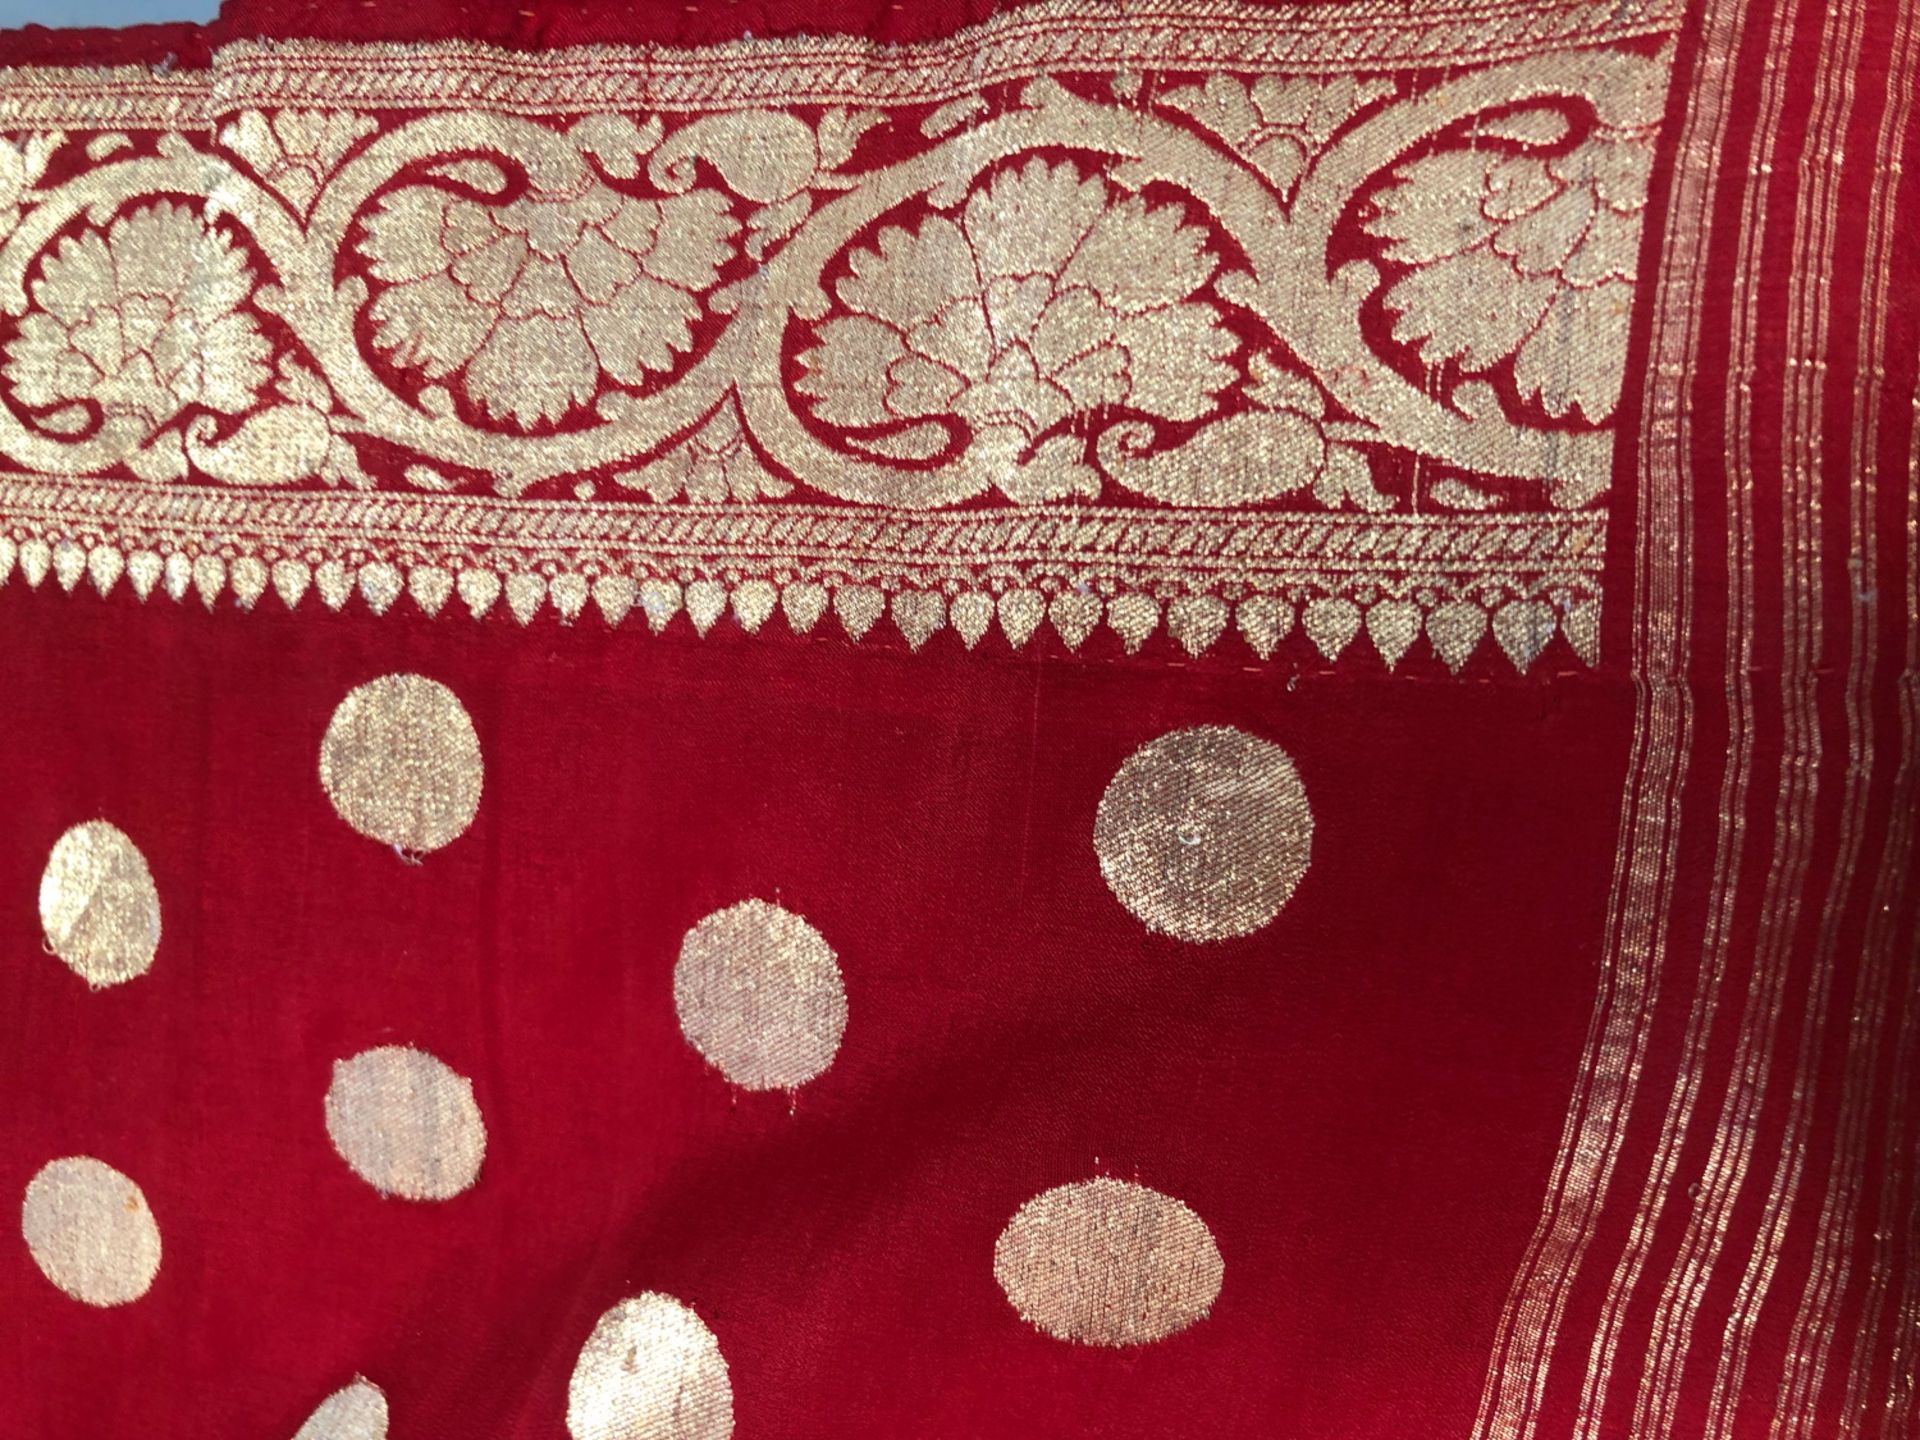 A FINE INDIAN WEDDING SARI, DETAIL EMBROIDERED IN GOLD THREAD - Image 3 of 4